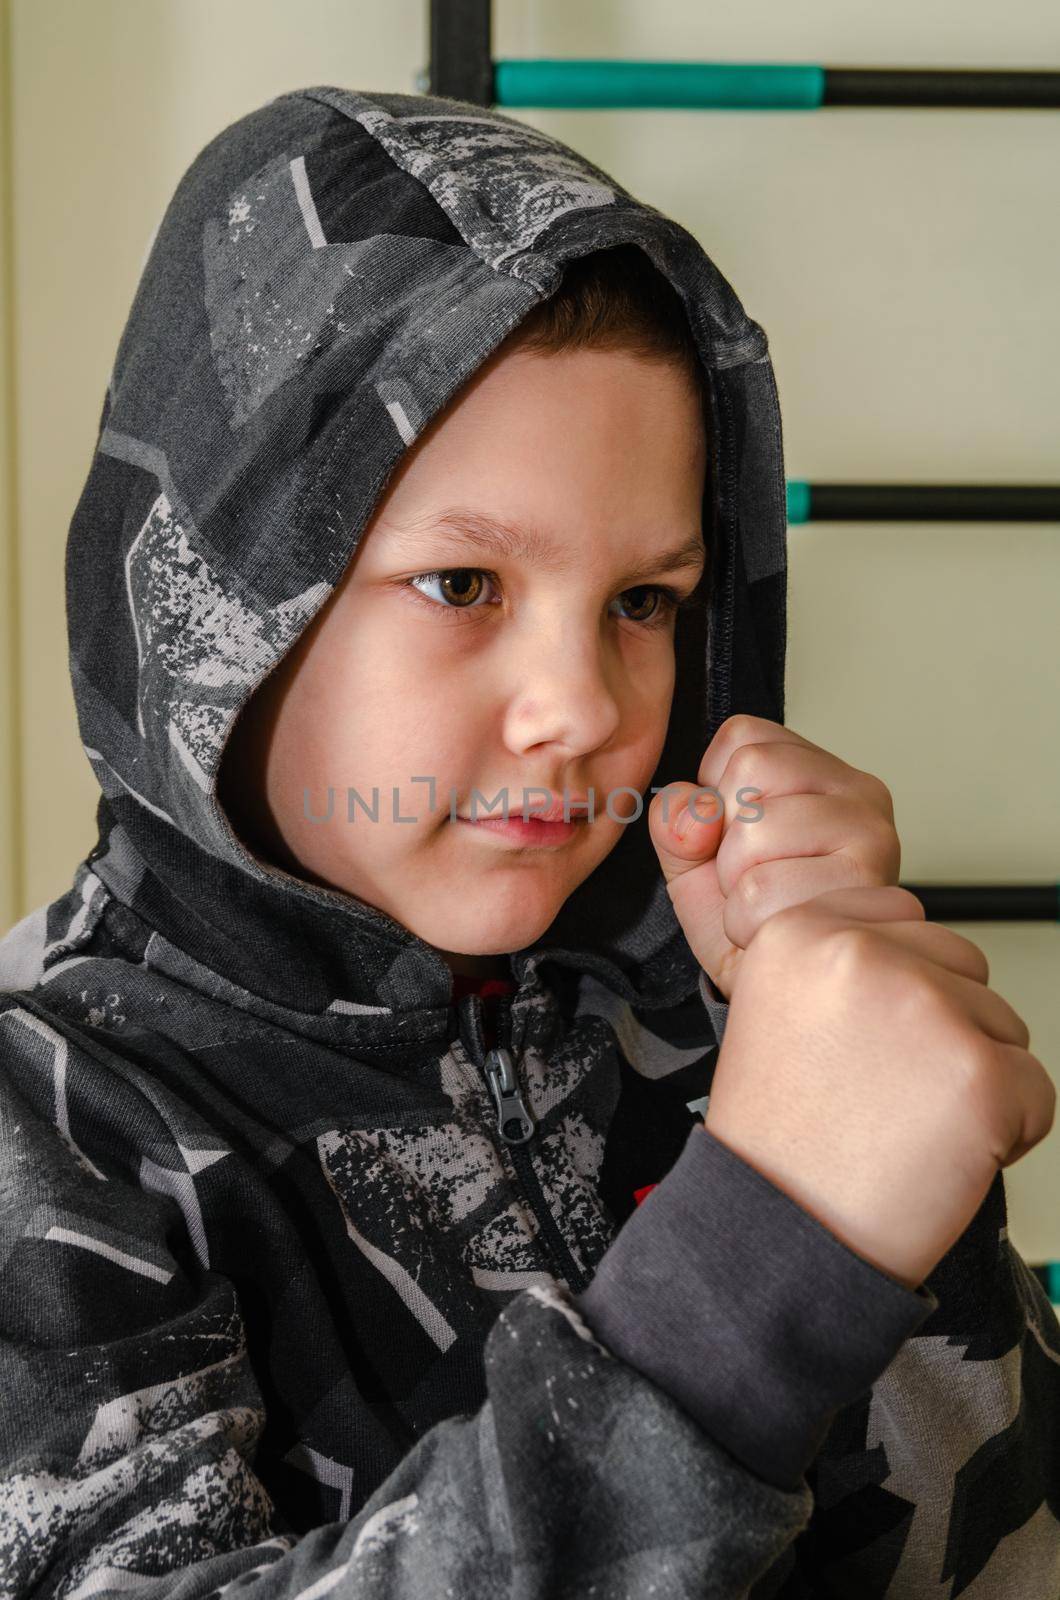 A little boy stands in a fighting stance in a hood. by Sergey